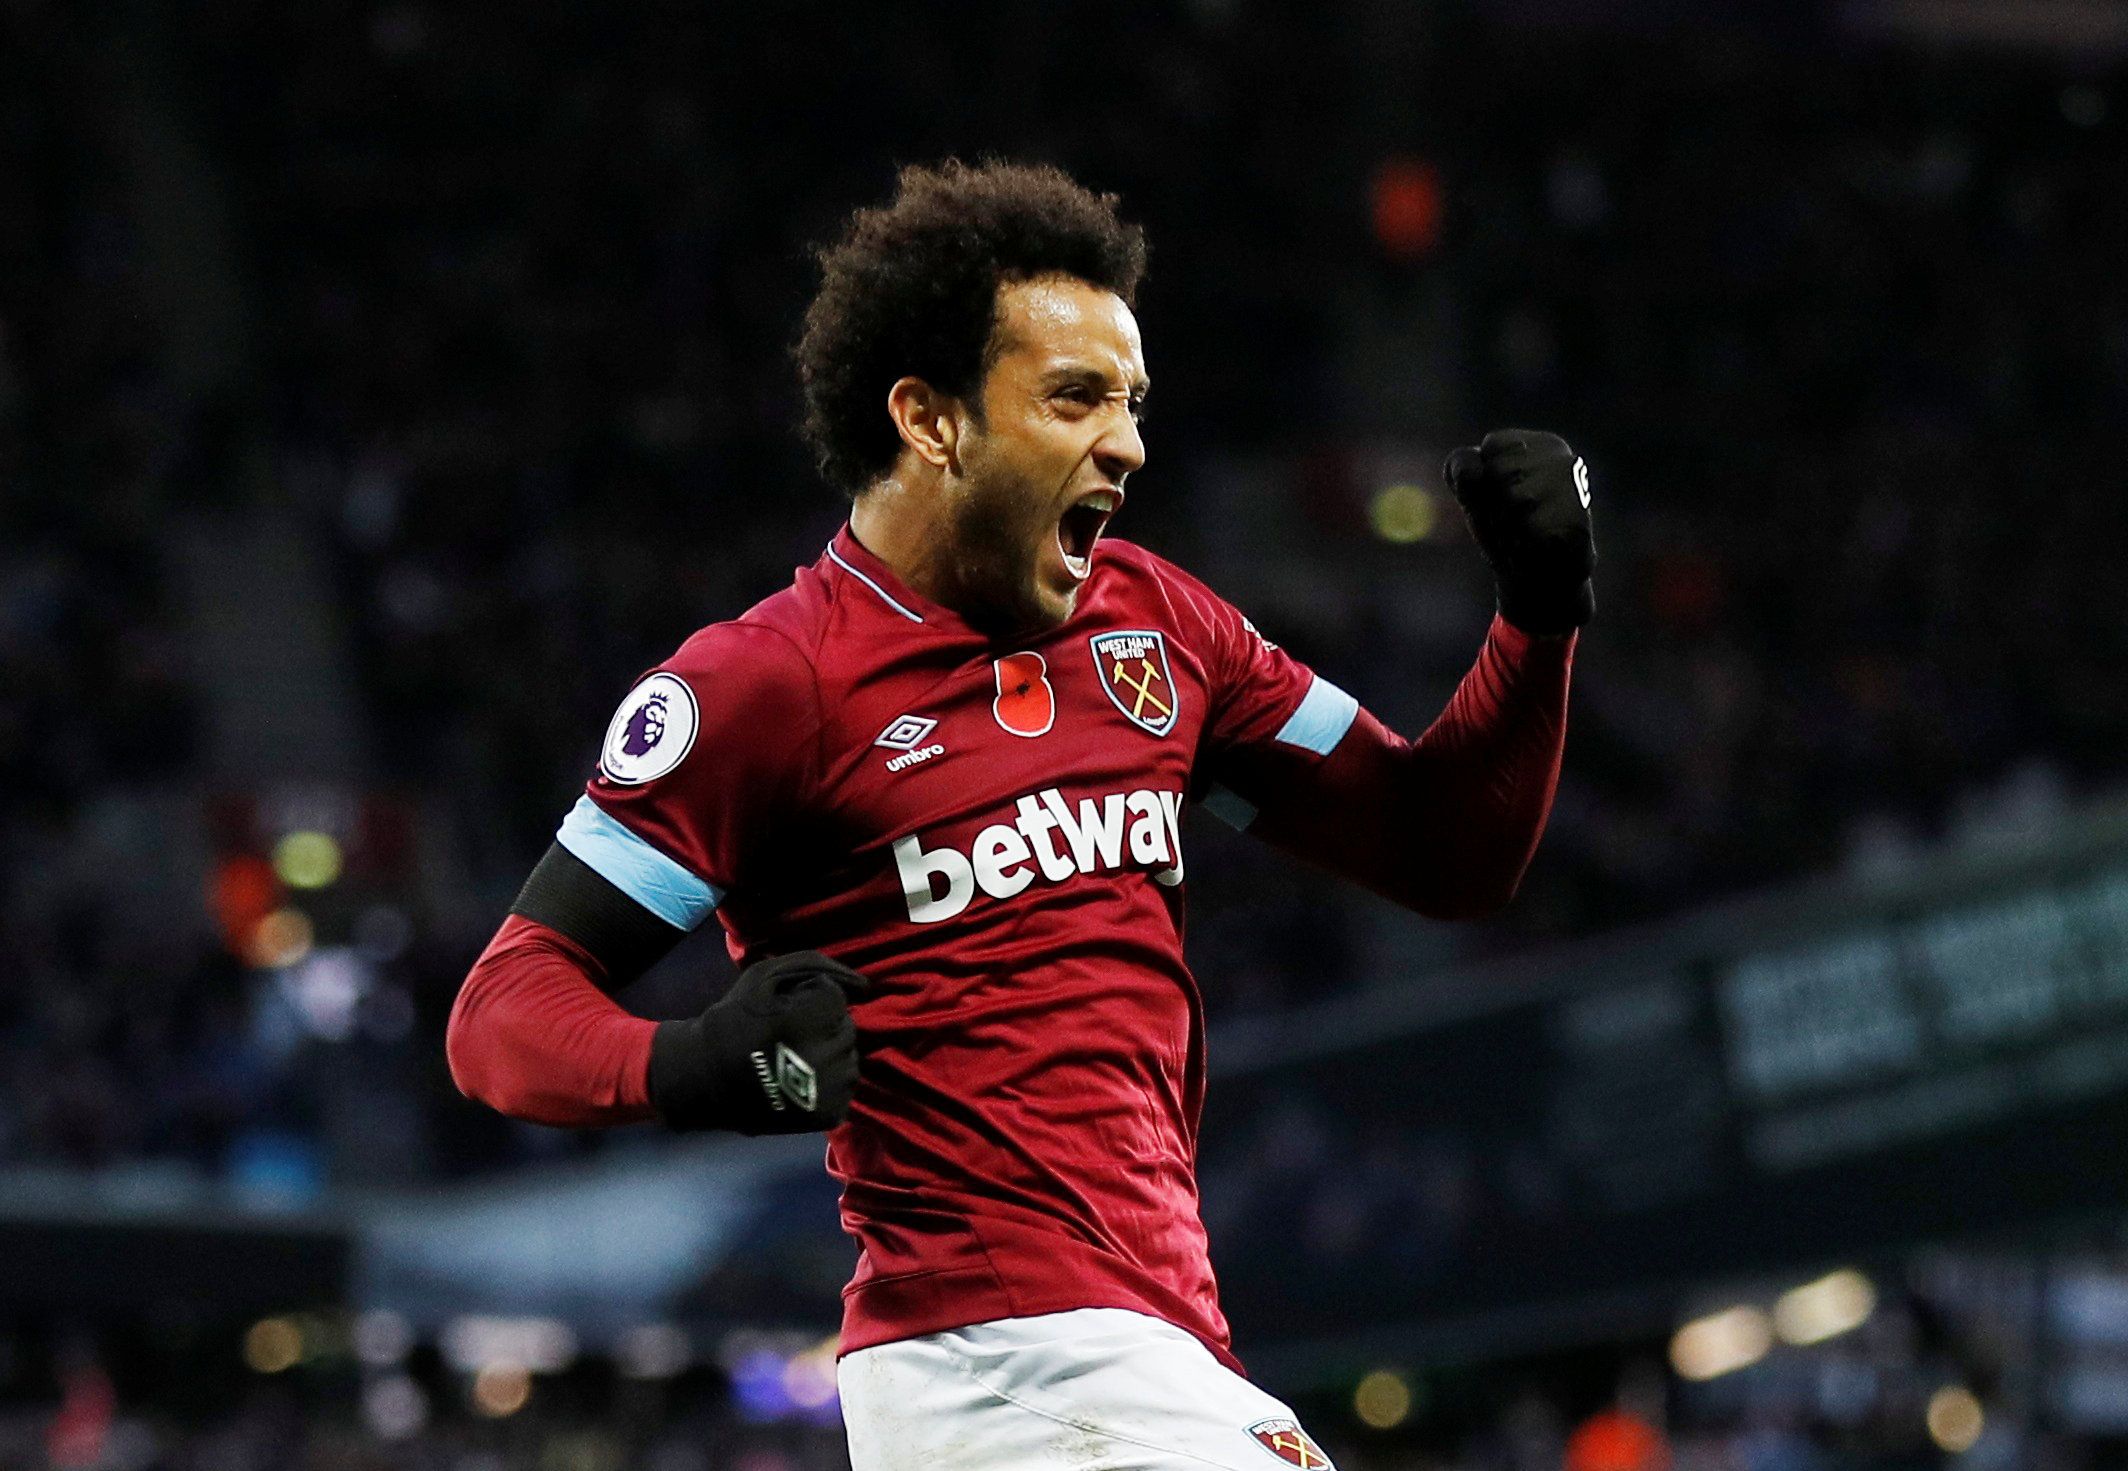 Soccer Football - Premier League - West Ham United v Burnley - London Stadium, London, Britain - November 3, 2018  West Ham's Felipe Anderson celebrates scoring their second goal          REUTERS/Peter Nicholls  EDITORIAL USE ONLY. No use with unauthorized audio, video, data, fixture lists, club/league logos or 